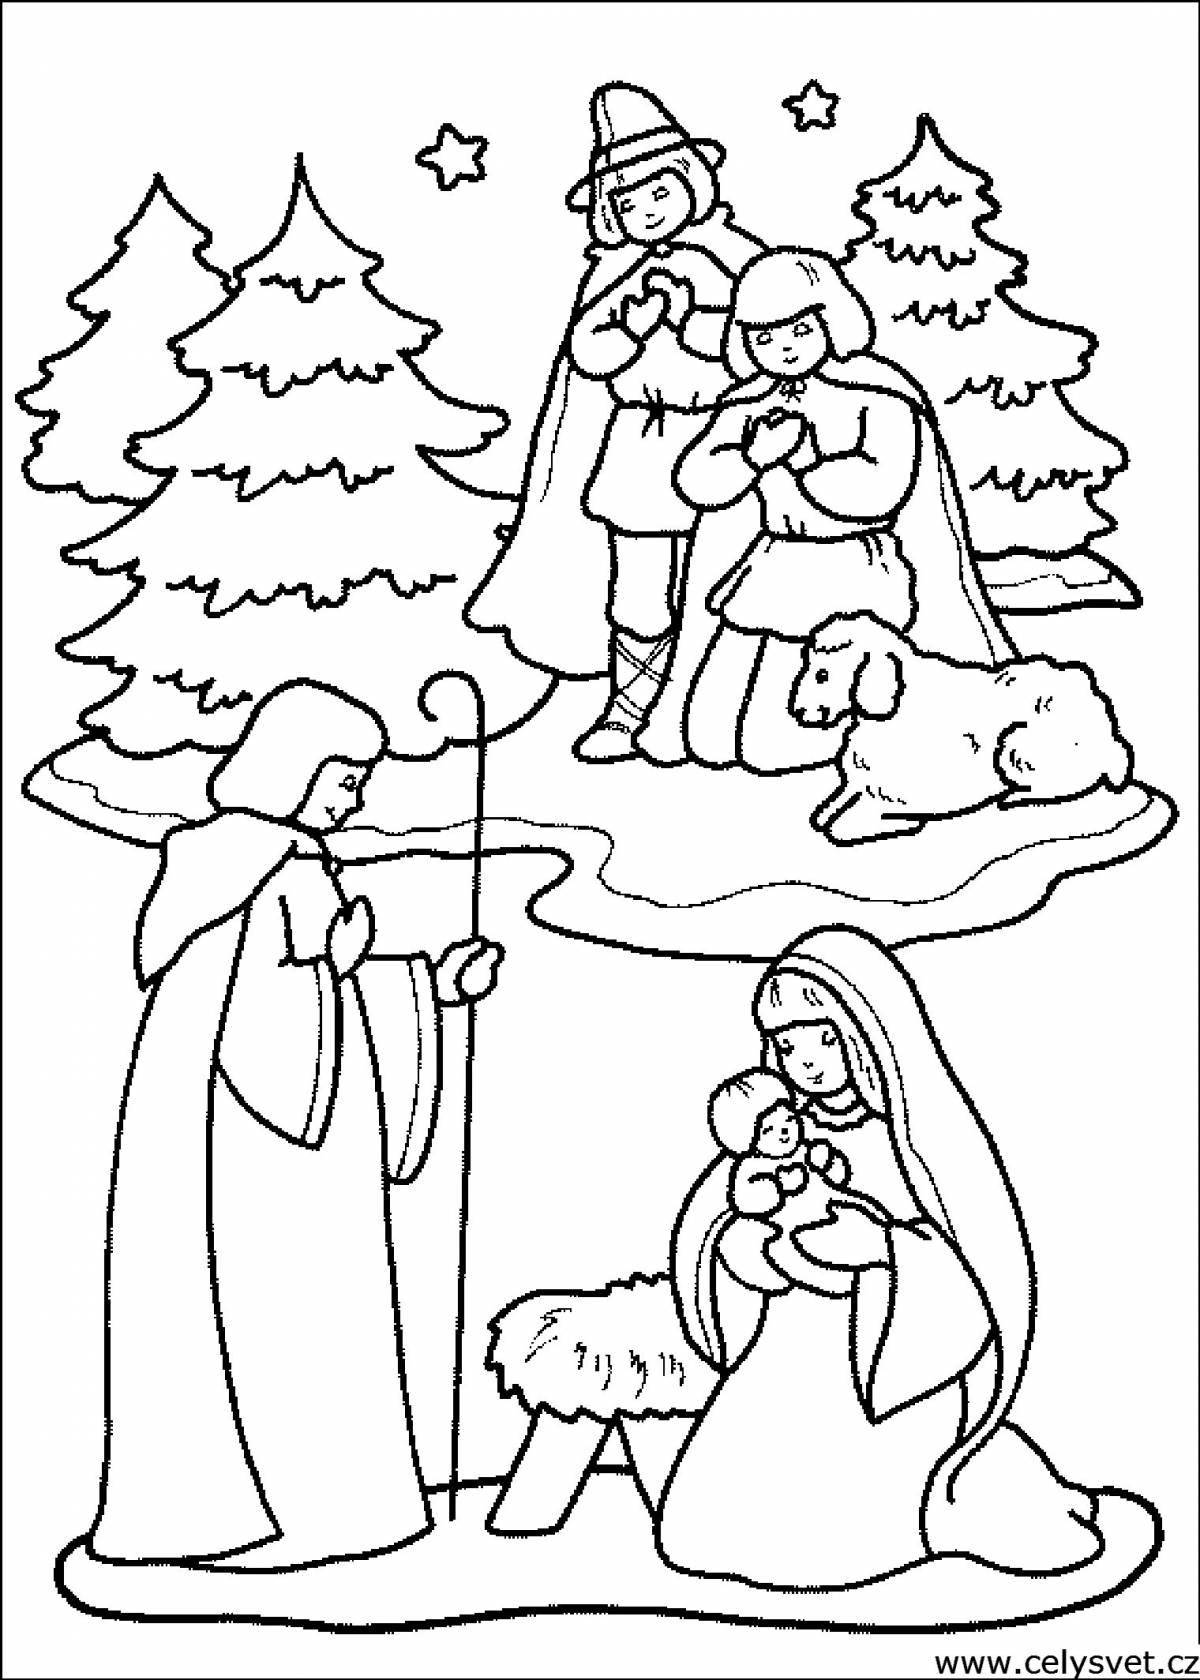 Exotic christmas eve coloring book